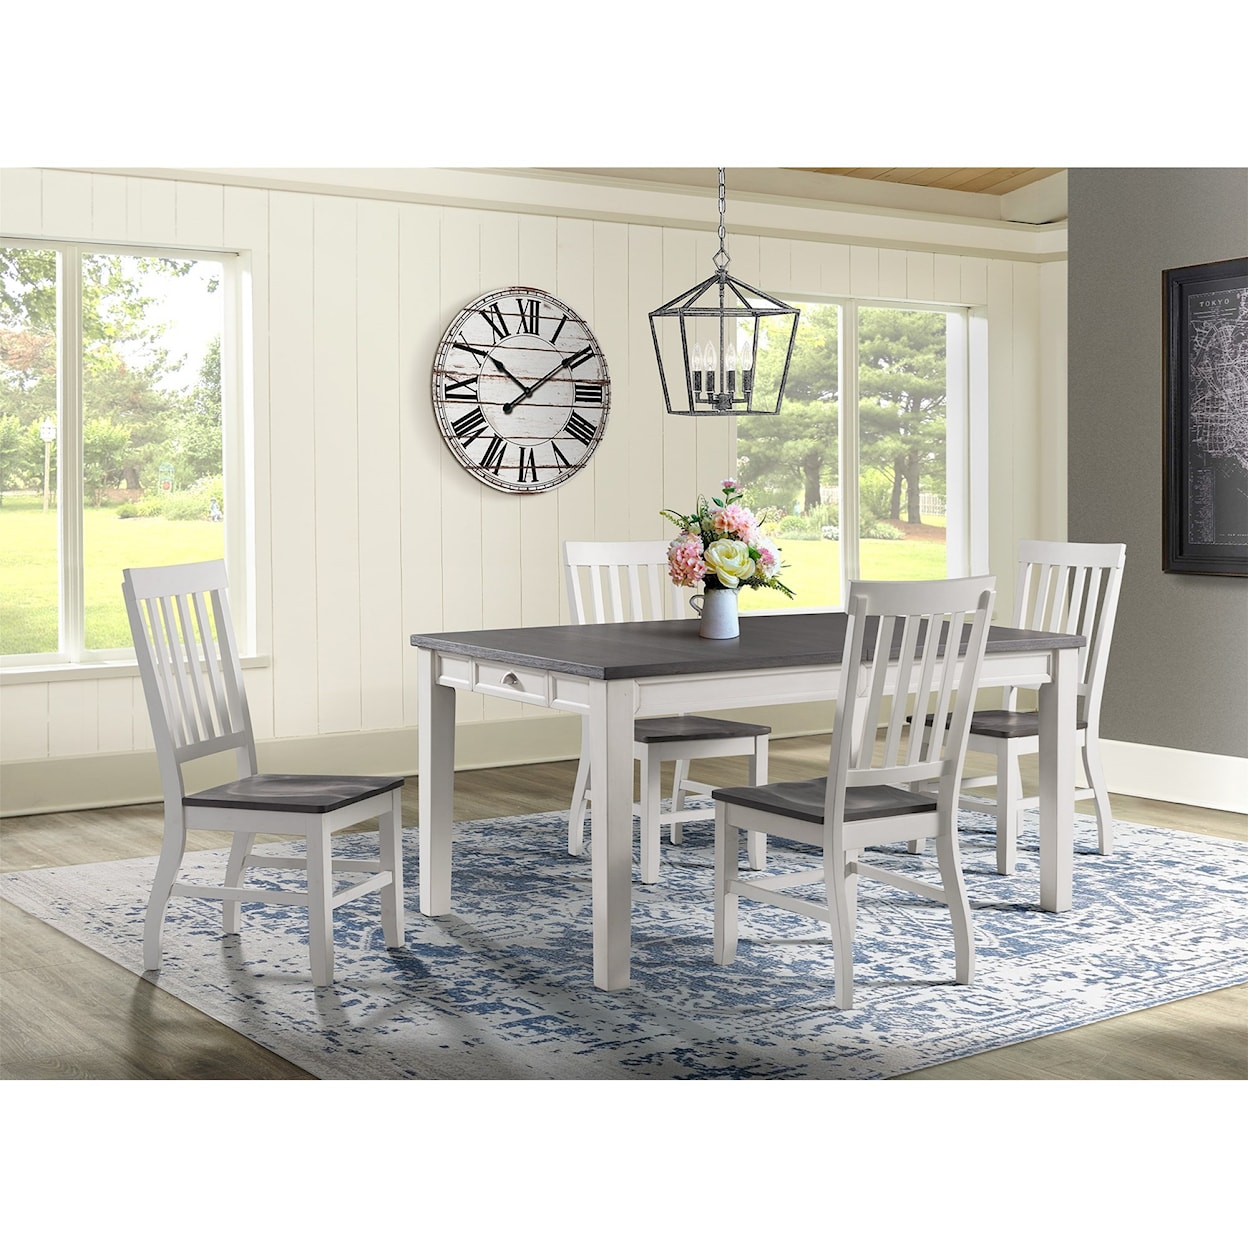 Elements International Kayla 5-Piece Dining Table and Chair Set